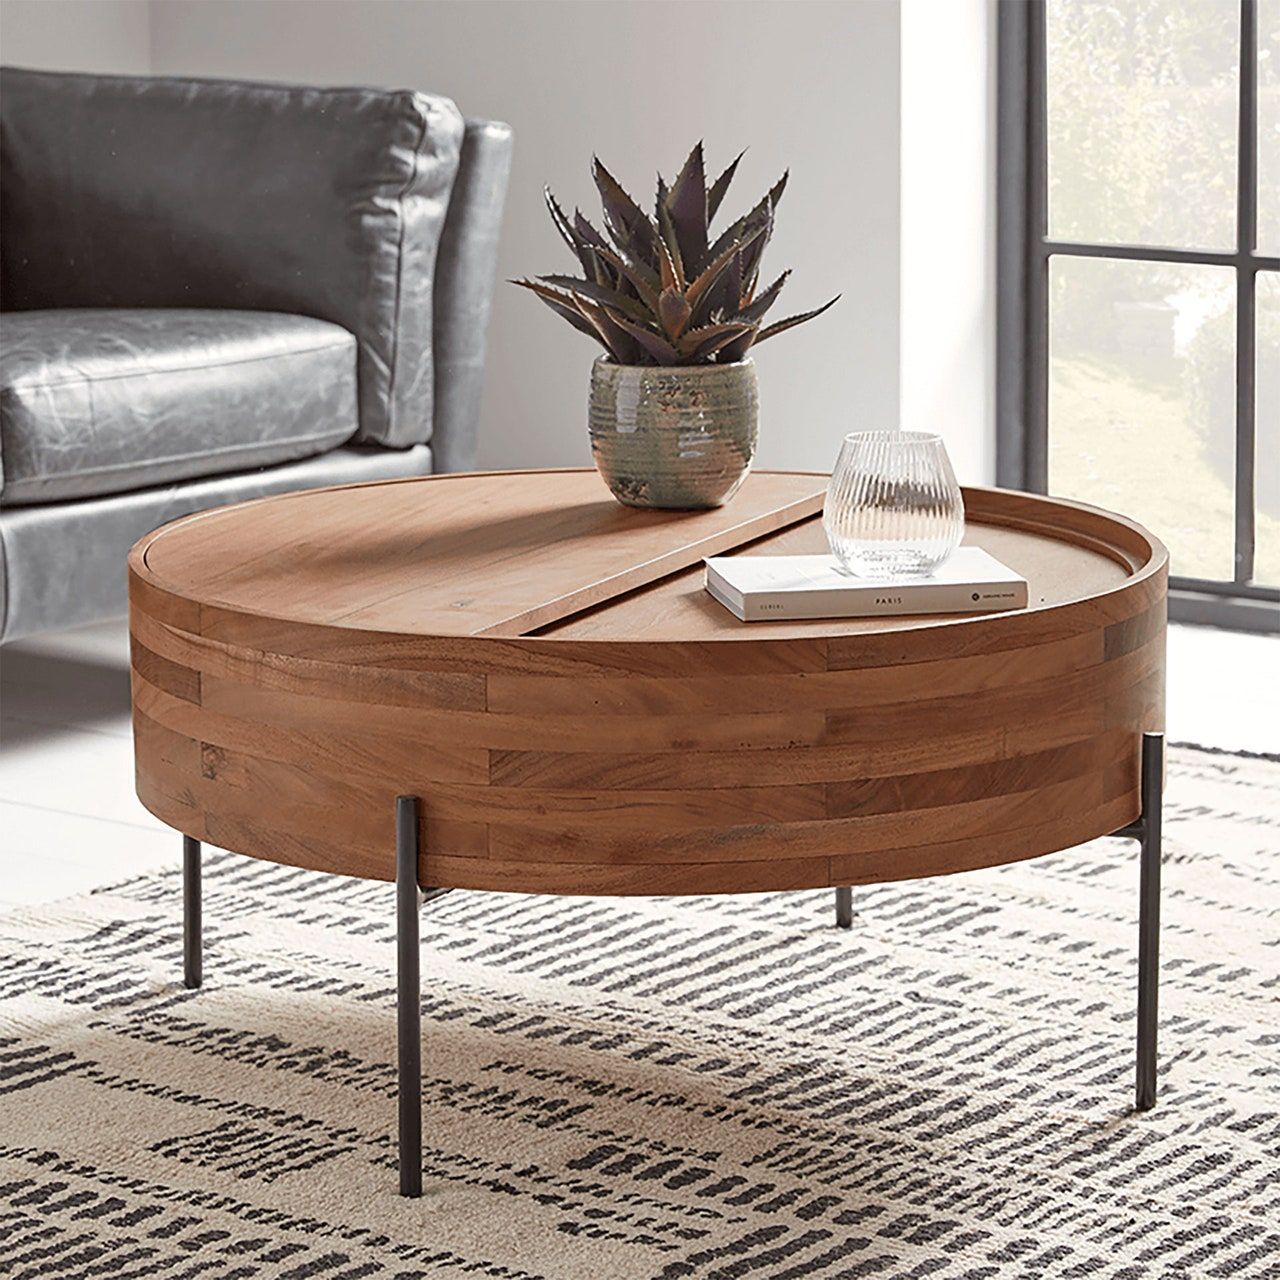 23 Stylish & Functional Coffee Tables: Best Coffee Tables 2022 | Glamour Uk Within Coffee Tables With Storage (Gallery 19 of 20)